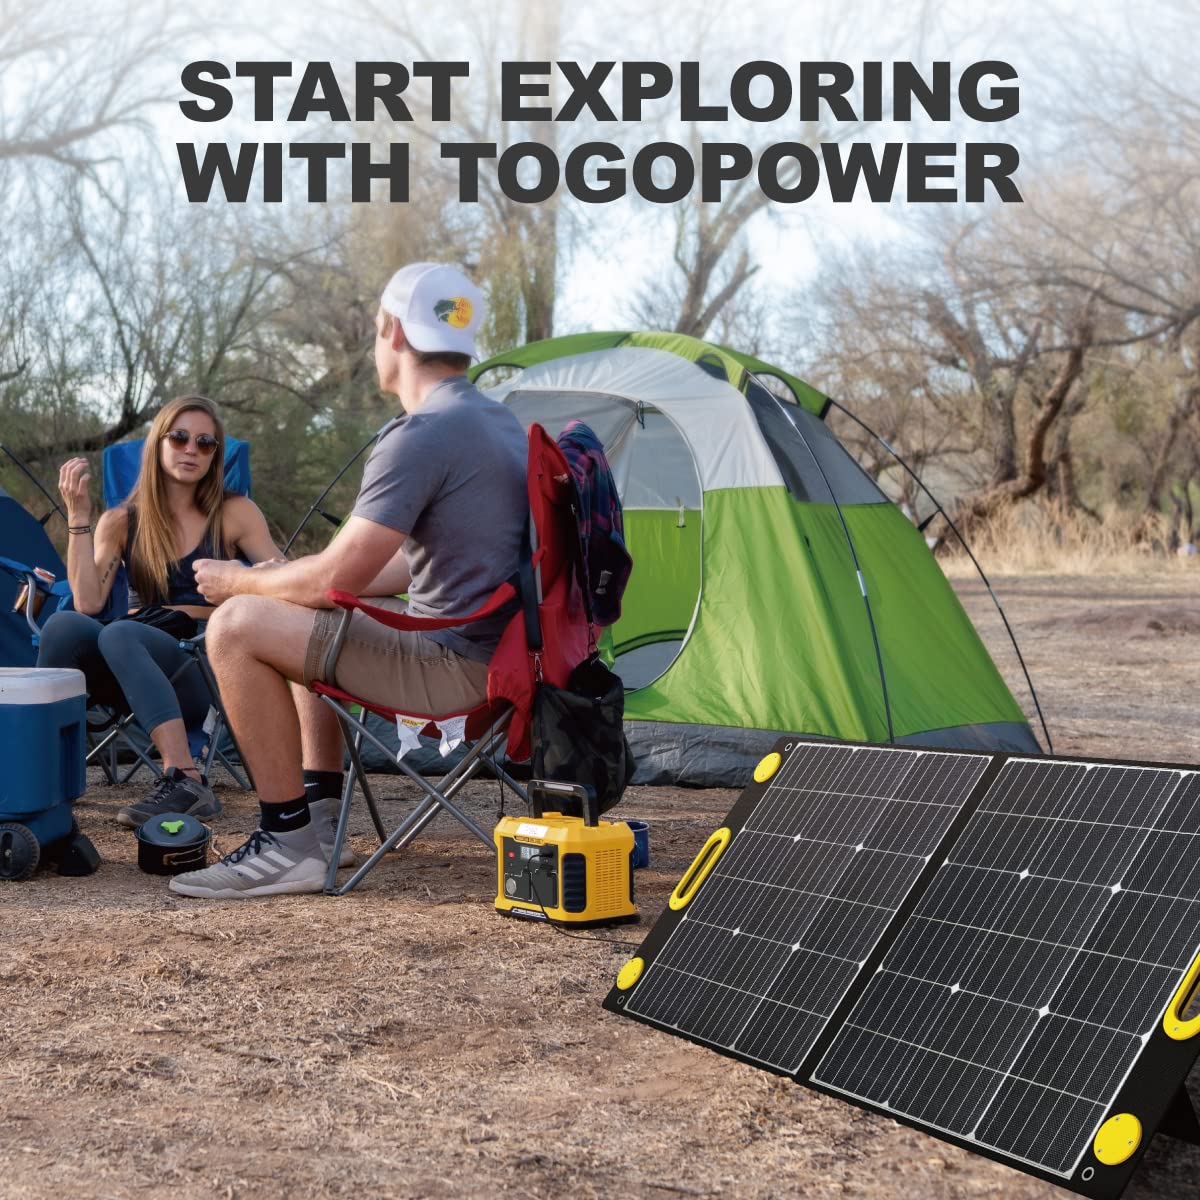 Togo Power 100W Portable Solar Panel for Jackery Explorer 240/300/500/ROCKPALS/Flashfish/Baldr Power Station, Foldable Solar Cell Solar Charger with USB Outputs for RV Laptop iPhone iPad